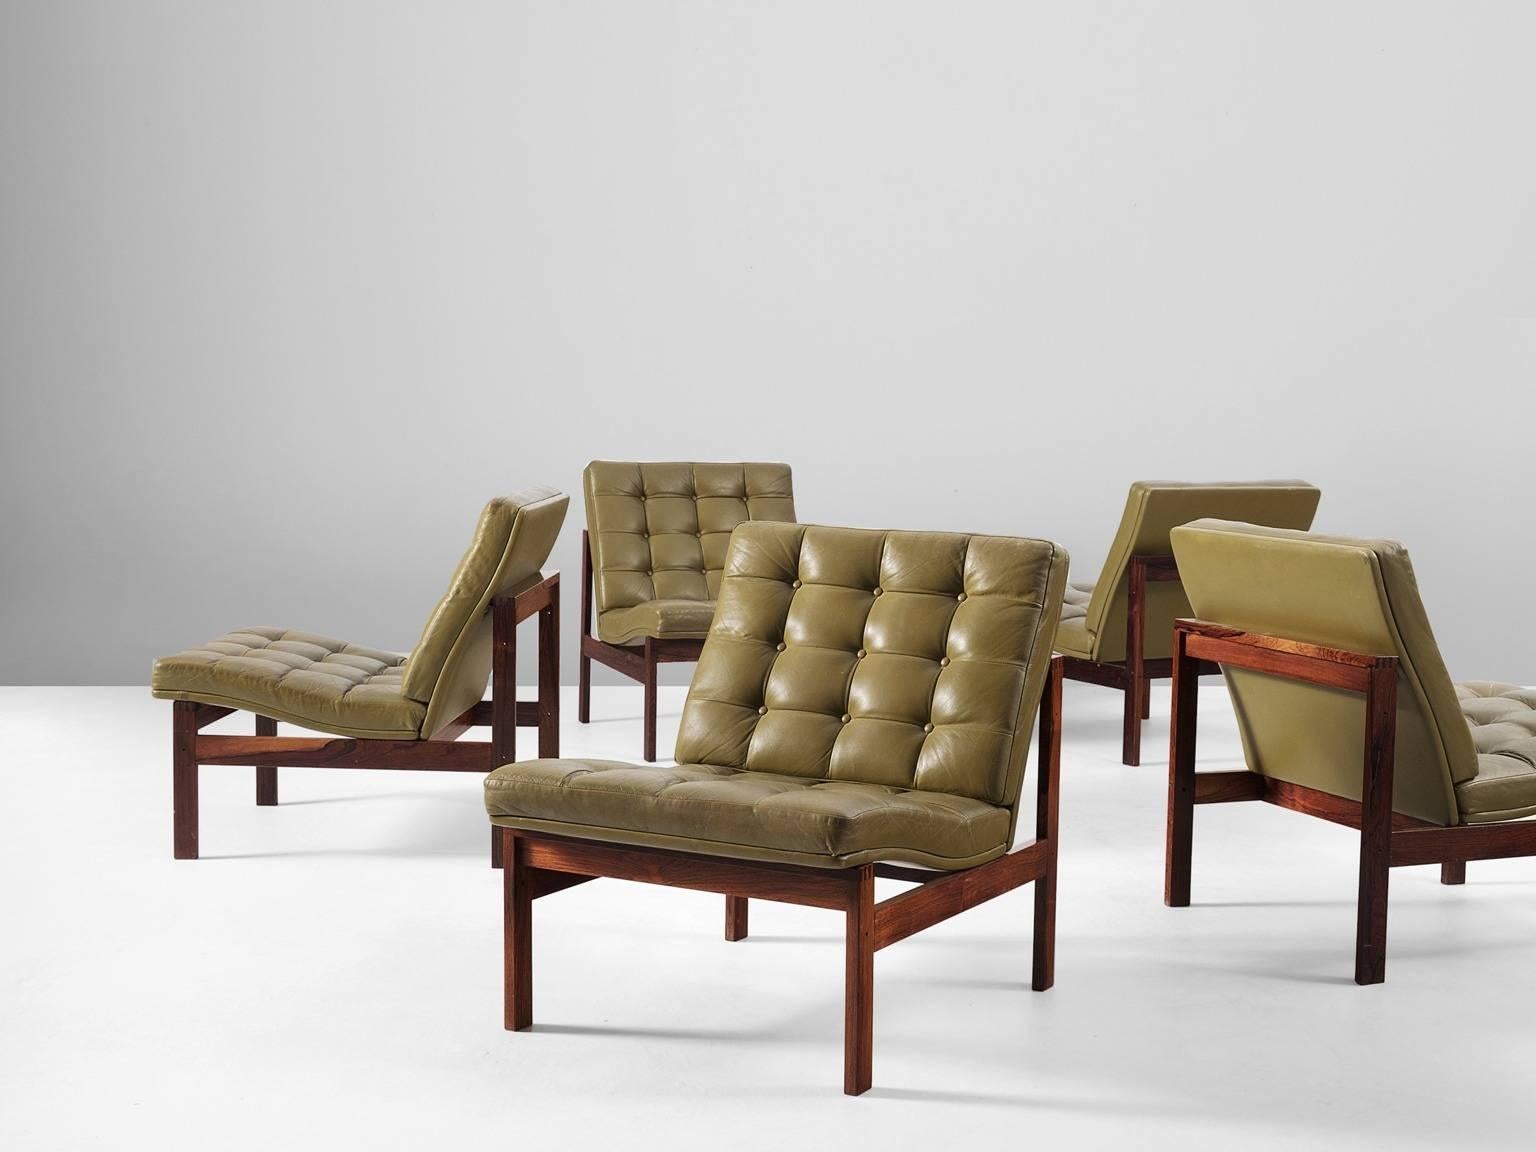 Set of five modular easy chairs, in rosewood and leather, by Ole Gjerløv-Knudsen & Torben Lind for France & Søn, Denmark, 1962.

Modern and beautiful colored set of five modular easy chairs. These chairs have a tight and simple design. The